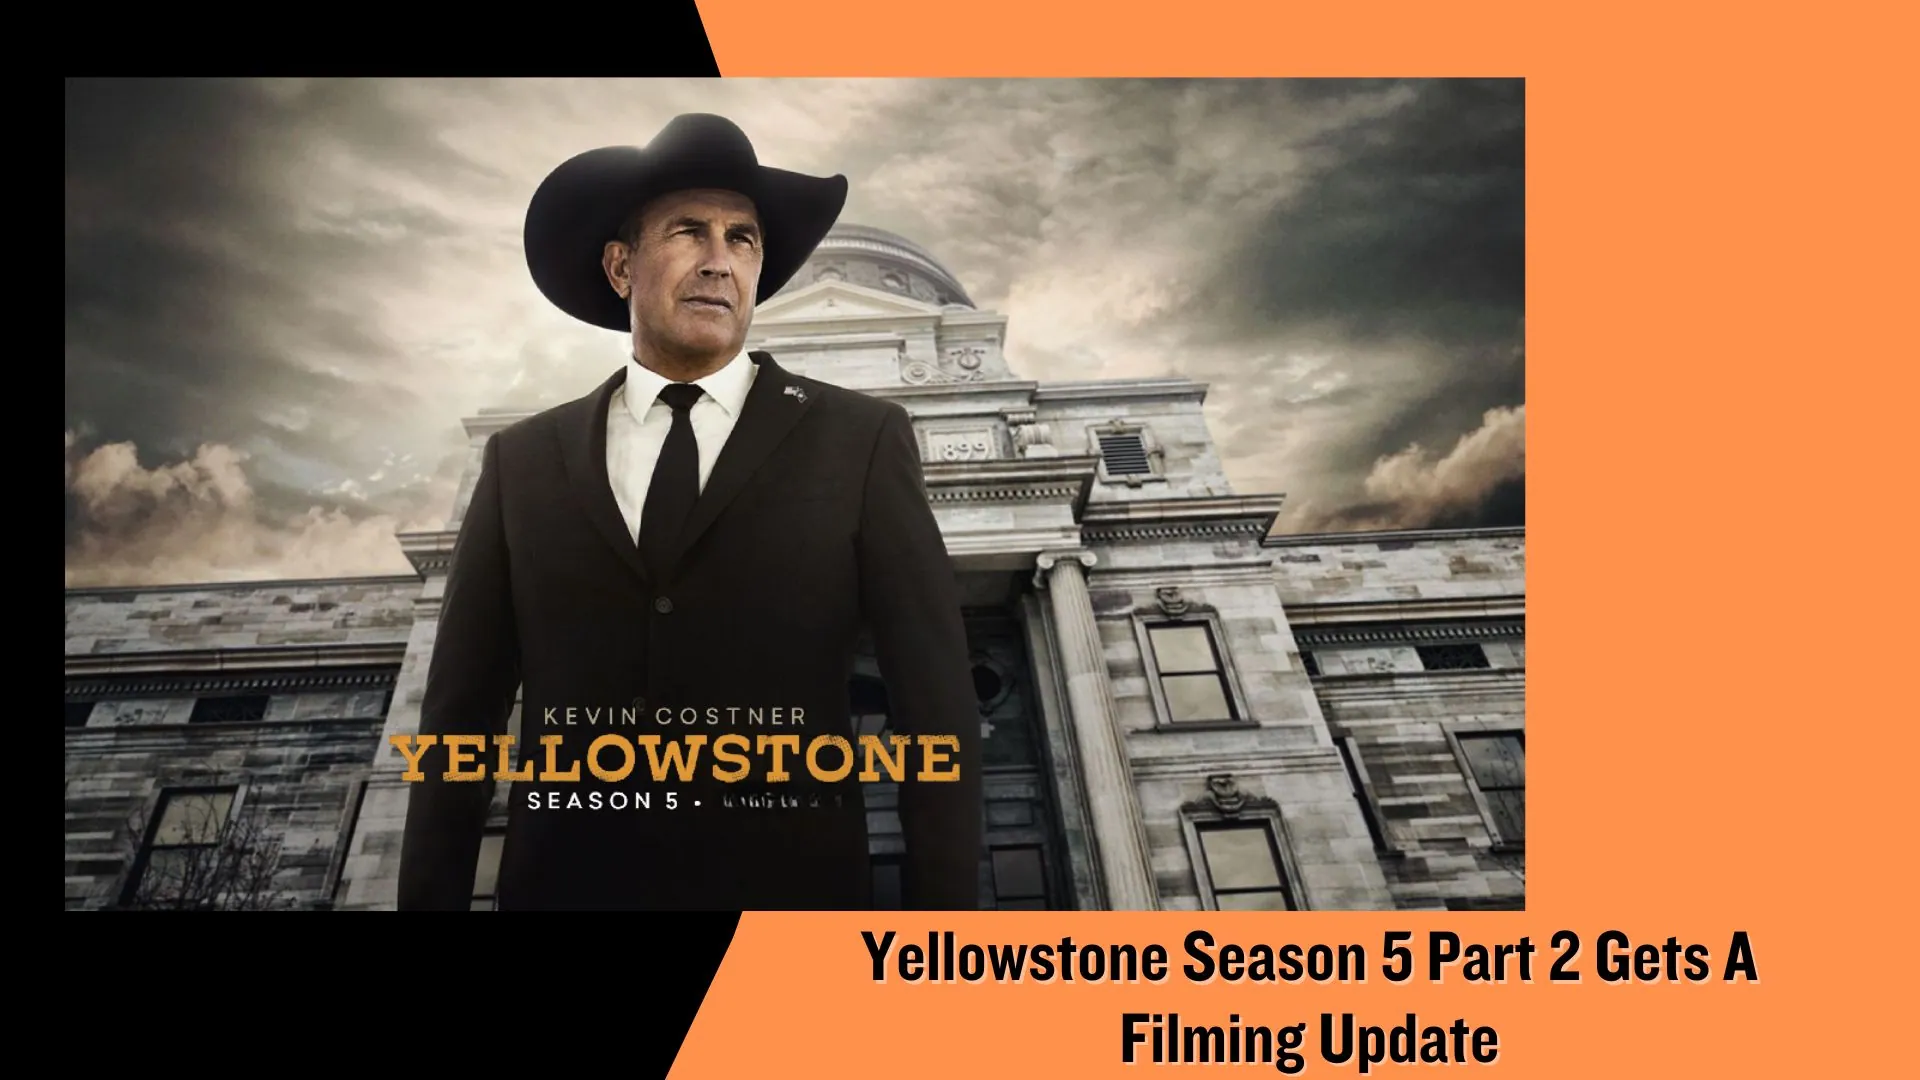 Yellowstone Season 5 Part 2 Gets A Filming Update